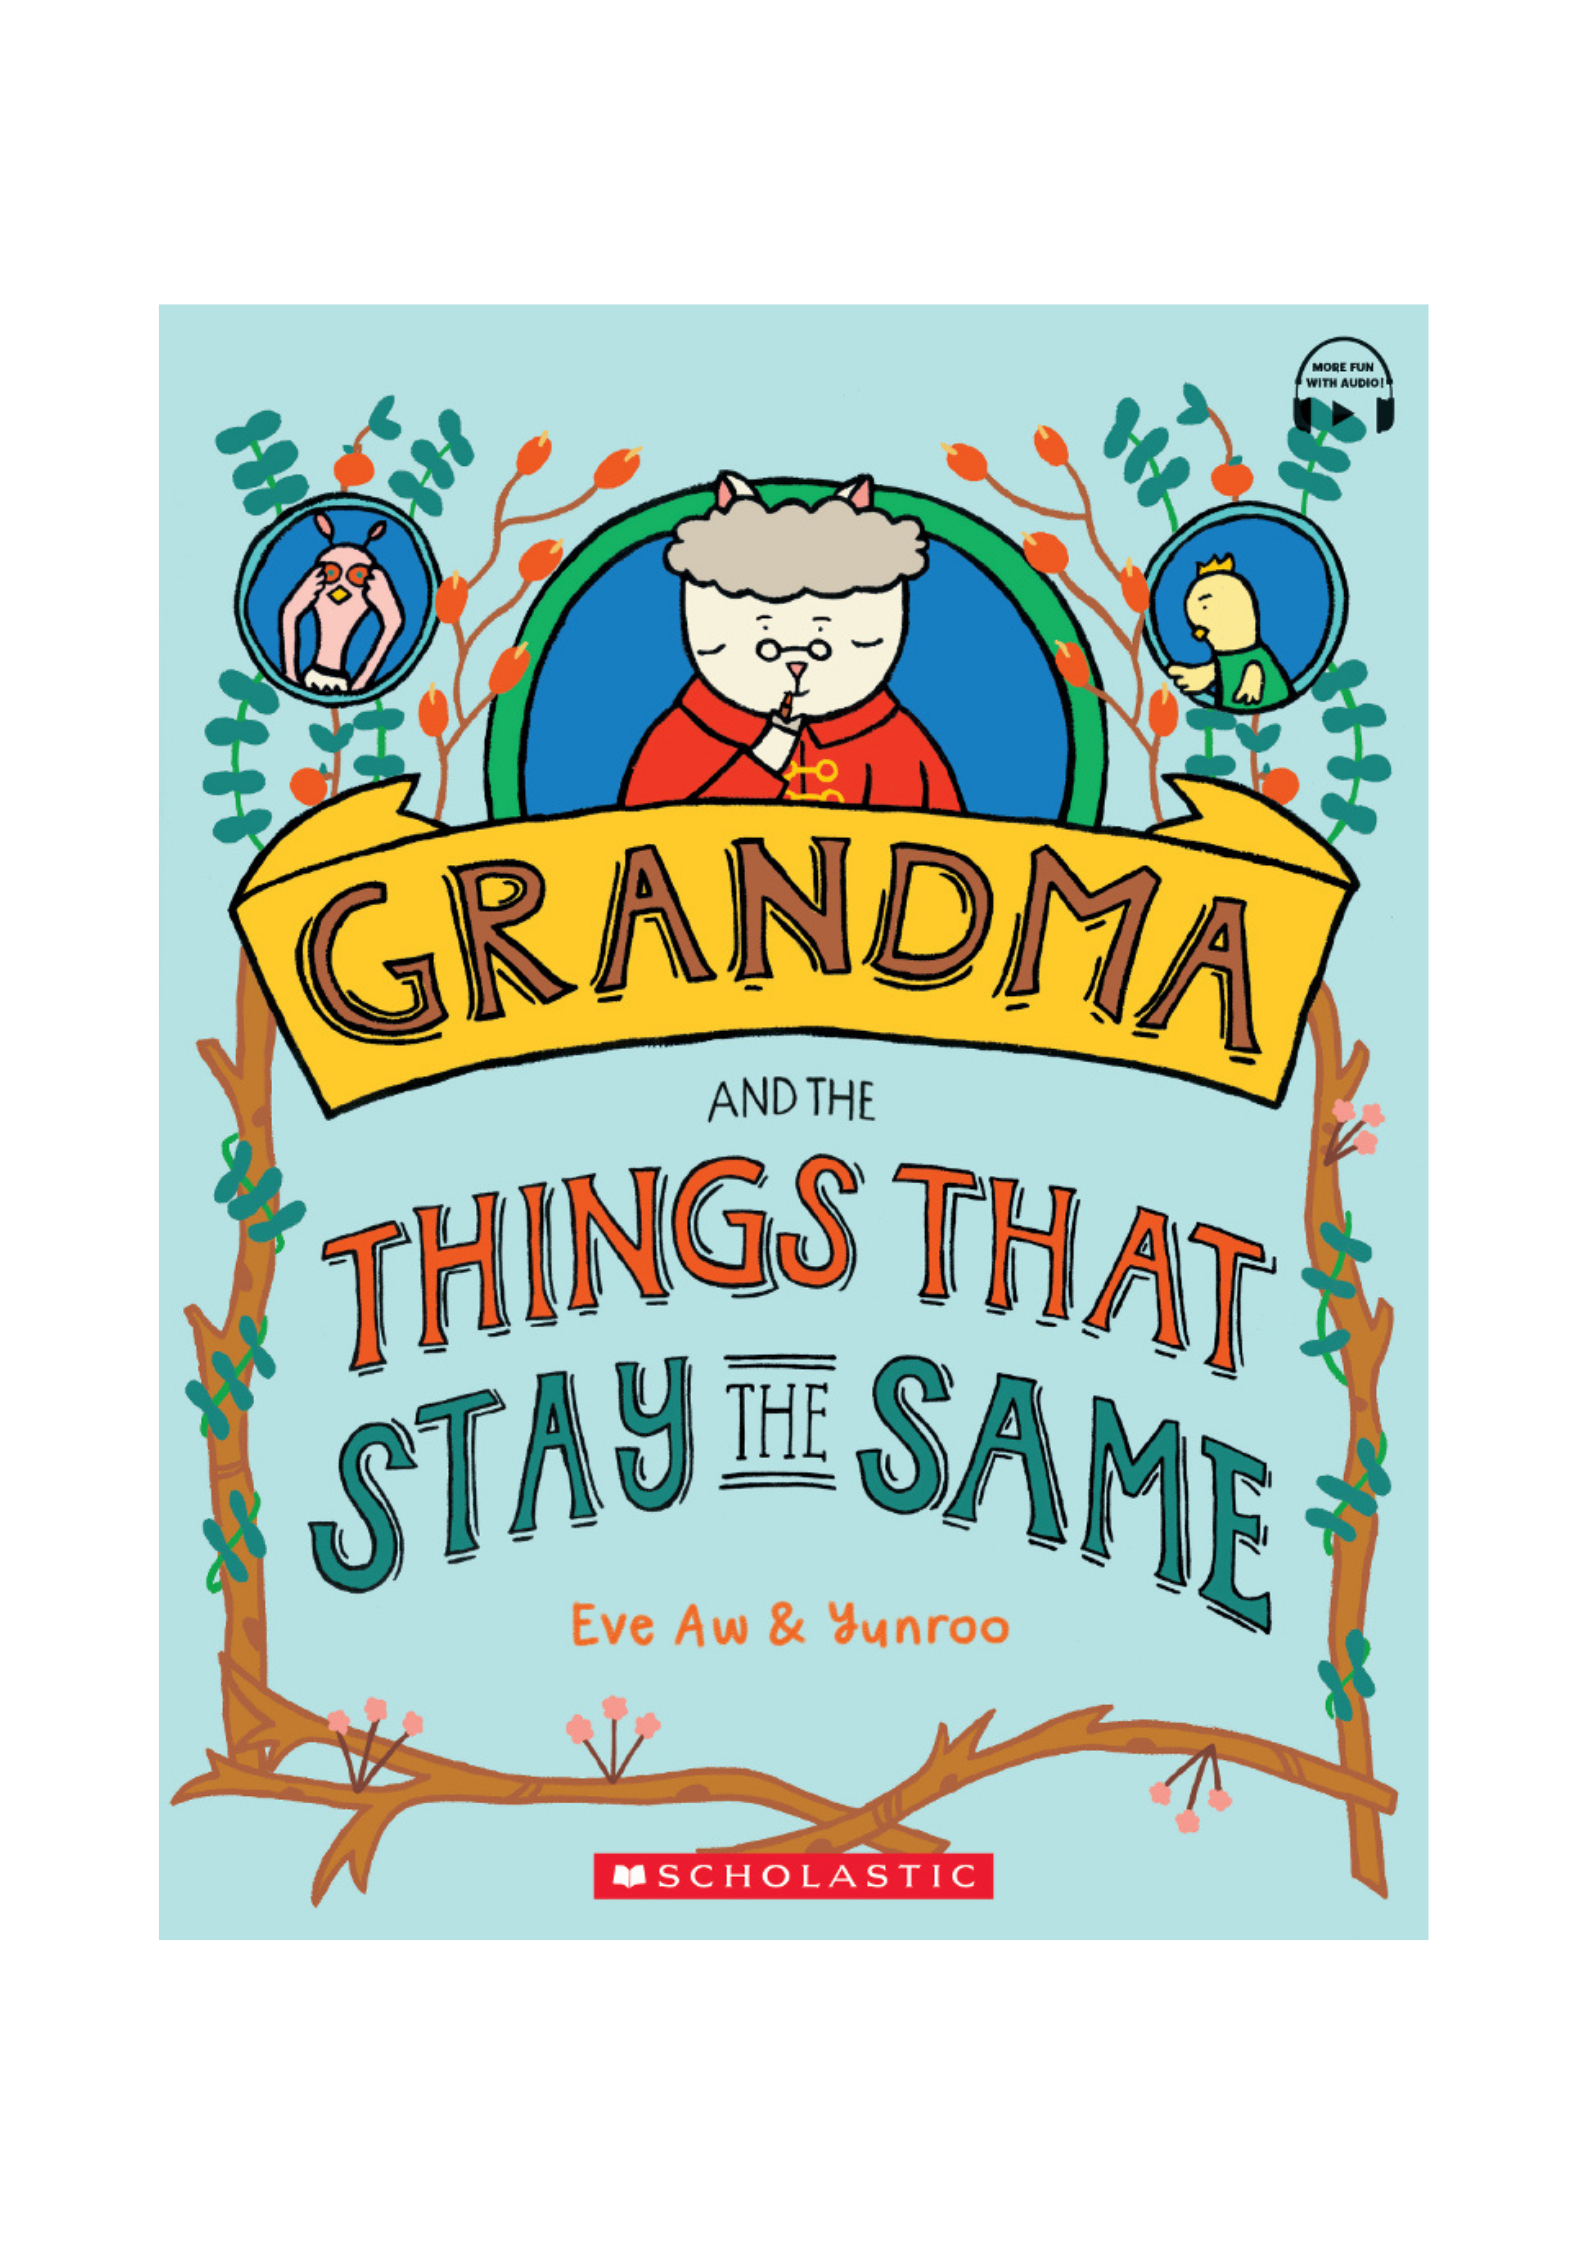 Grandma & the Things that Stay the Same